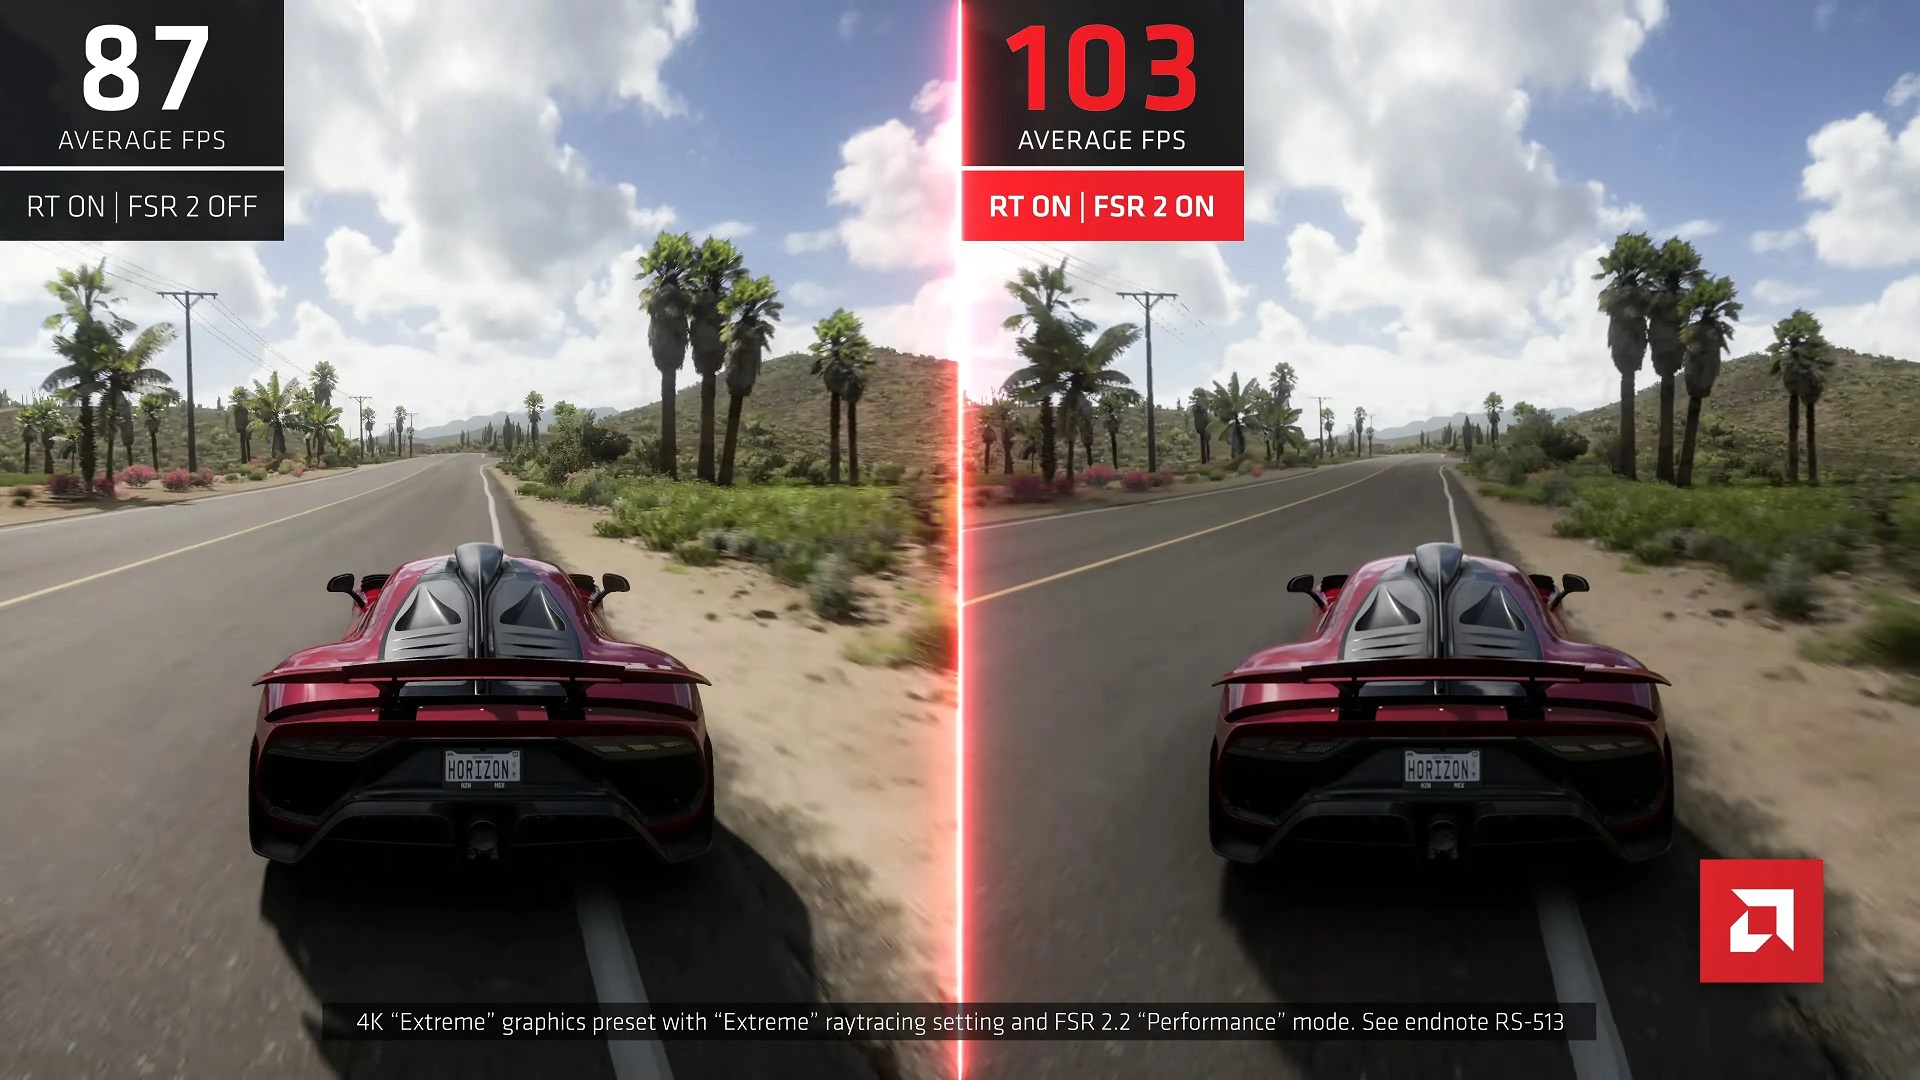 AMD Releases FSR 2.2 Source Code; Improved Graphics With Reduced Ghosting